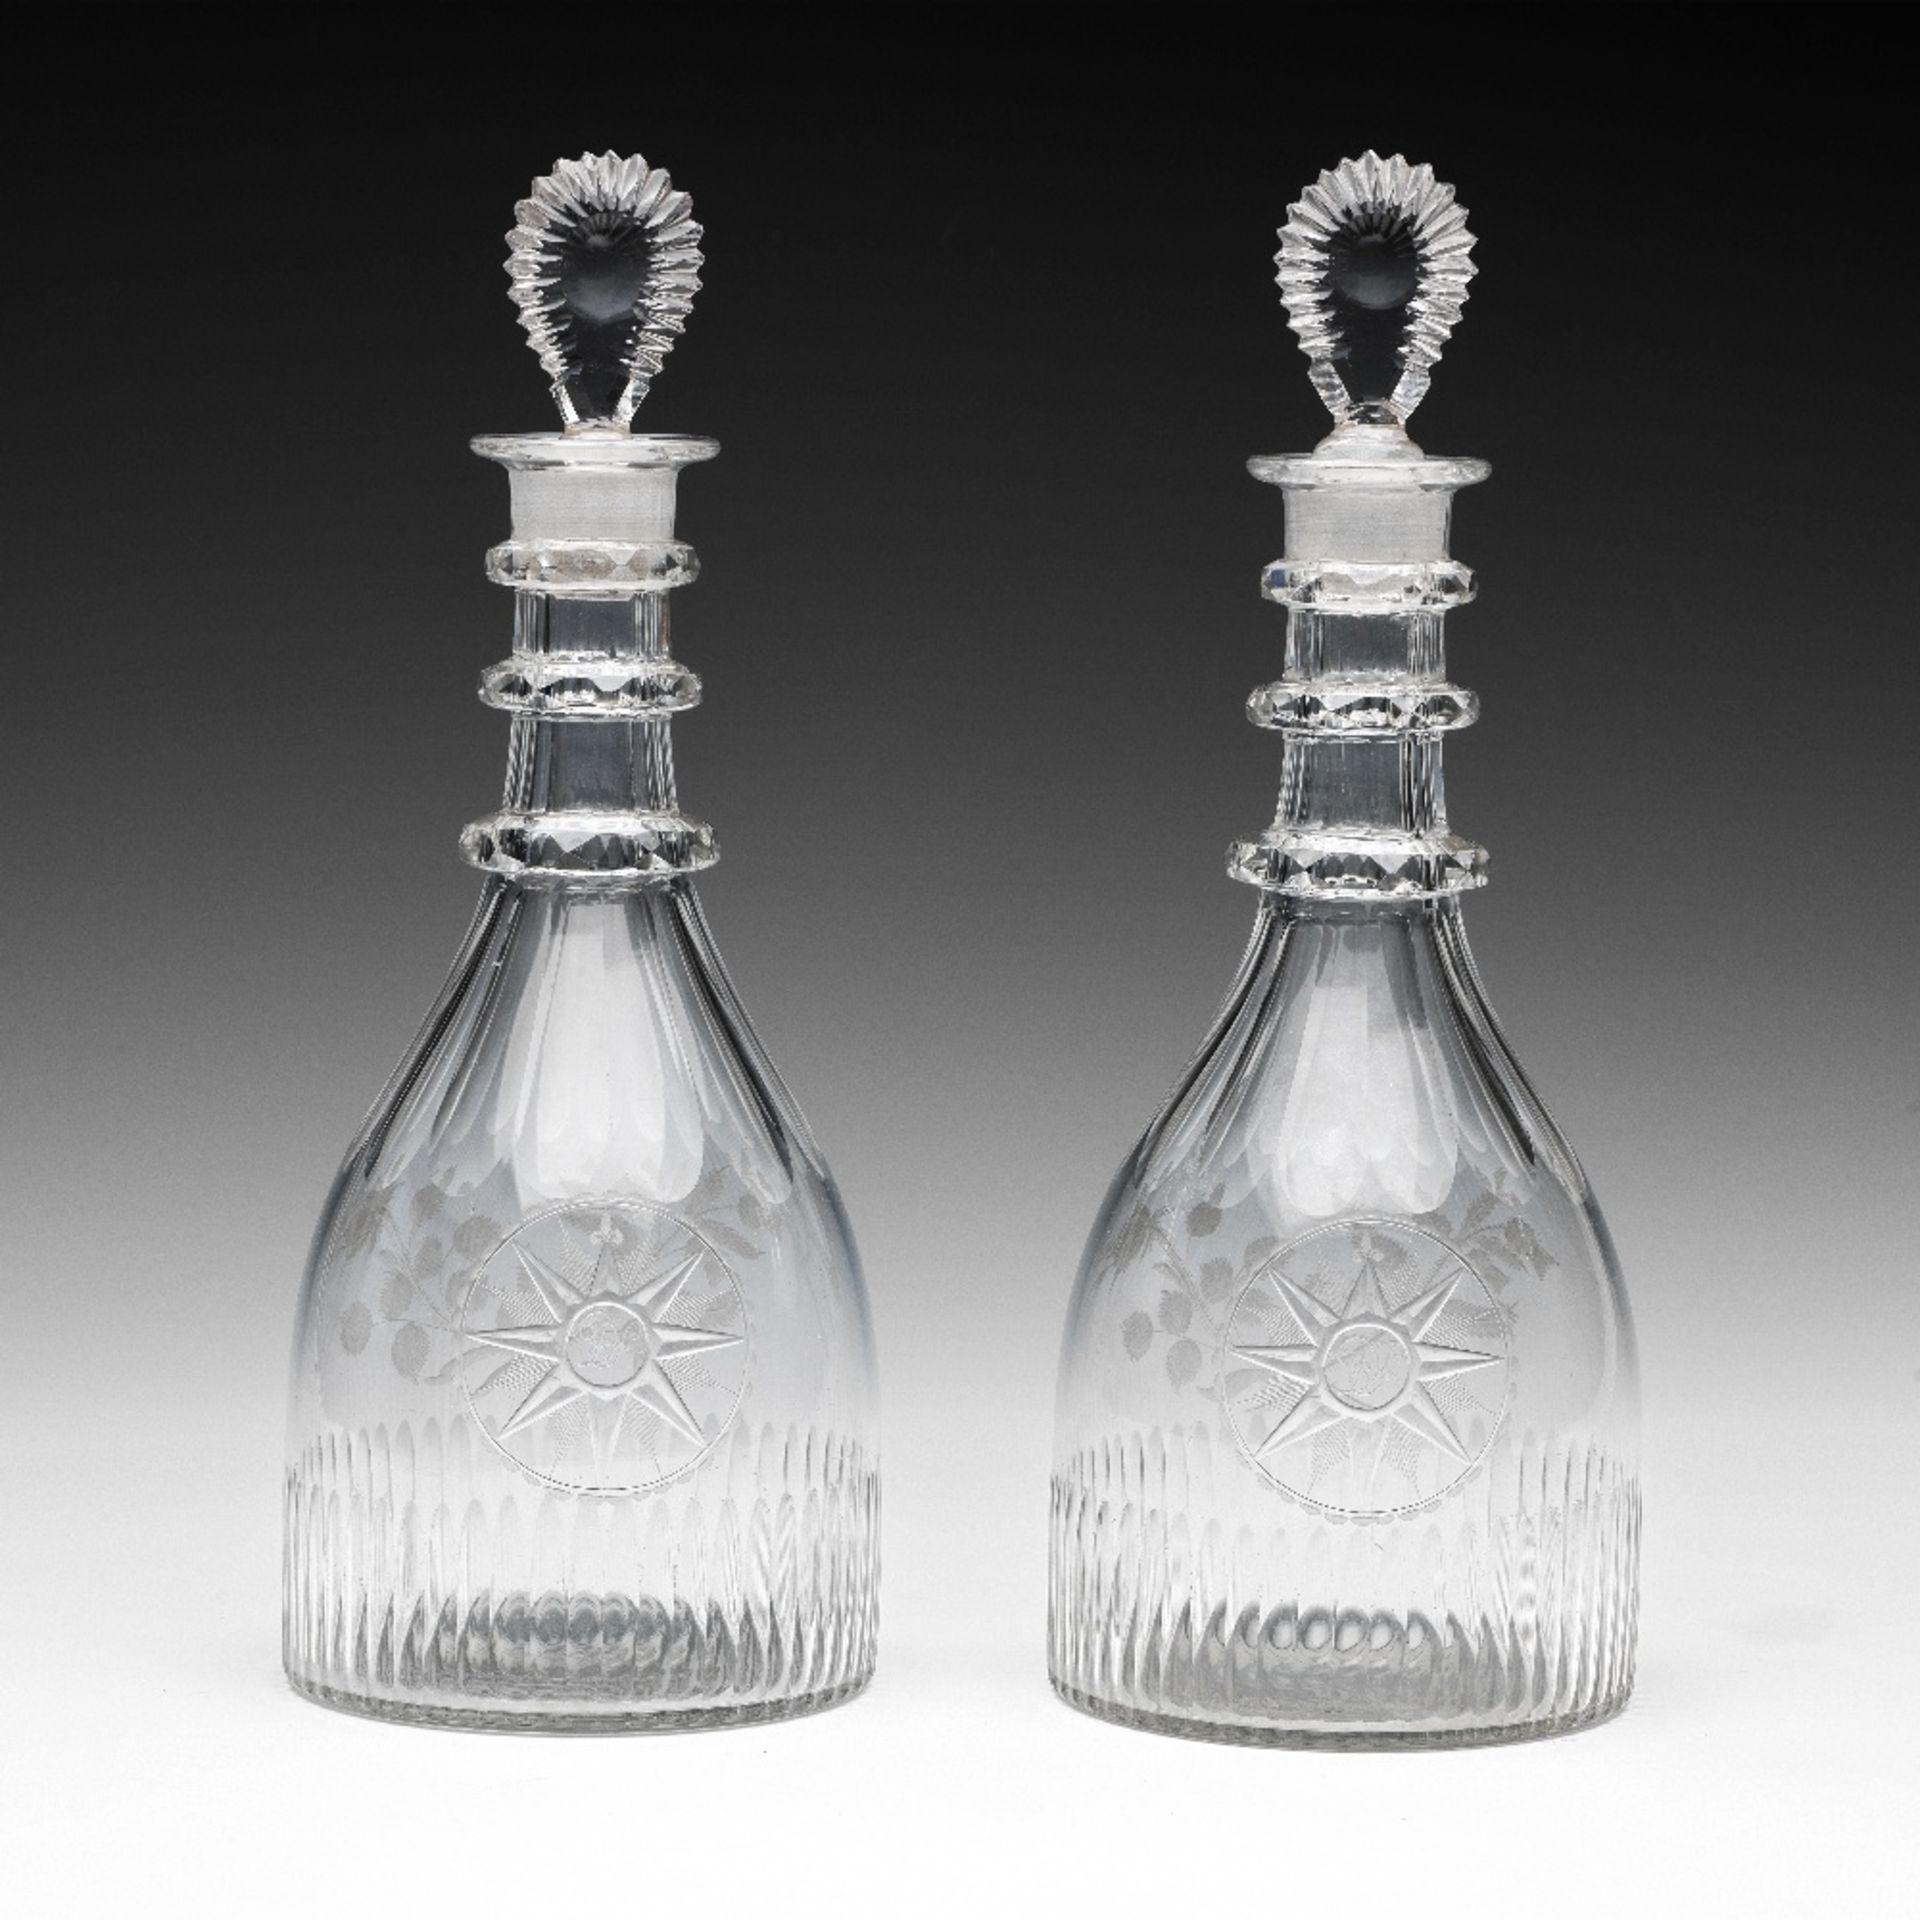 Jacobite significance: A pair of George III decanters Circa 1780